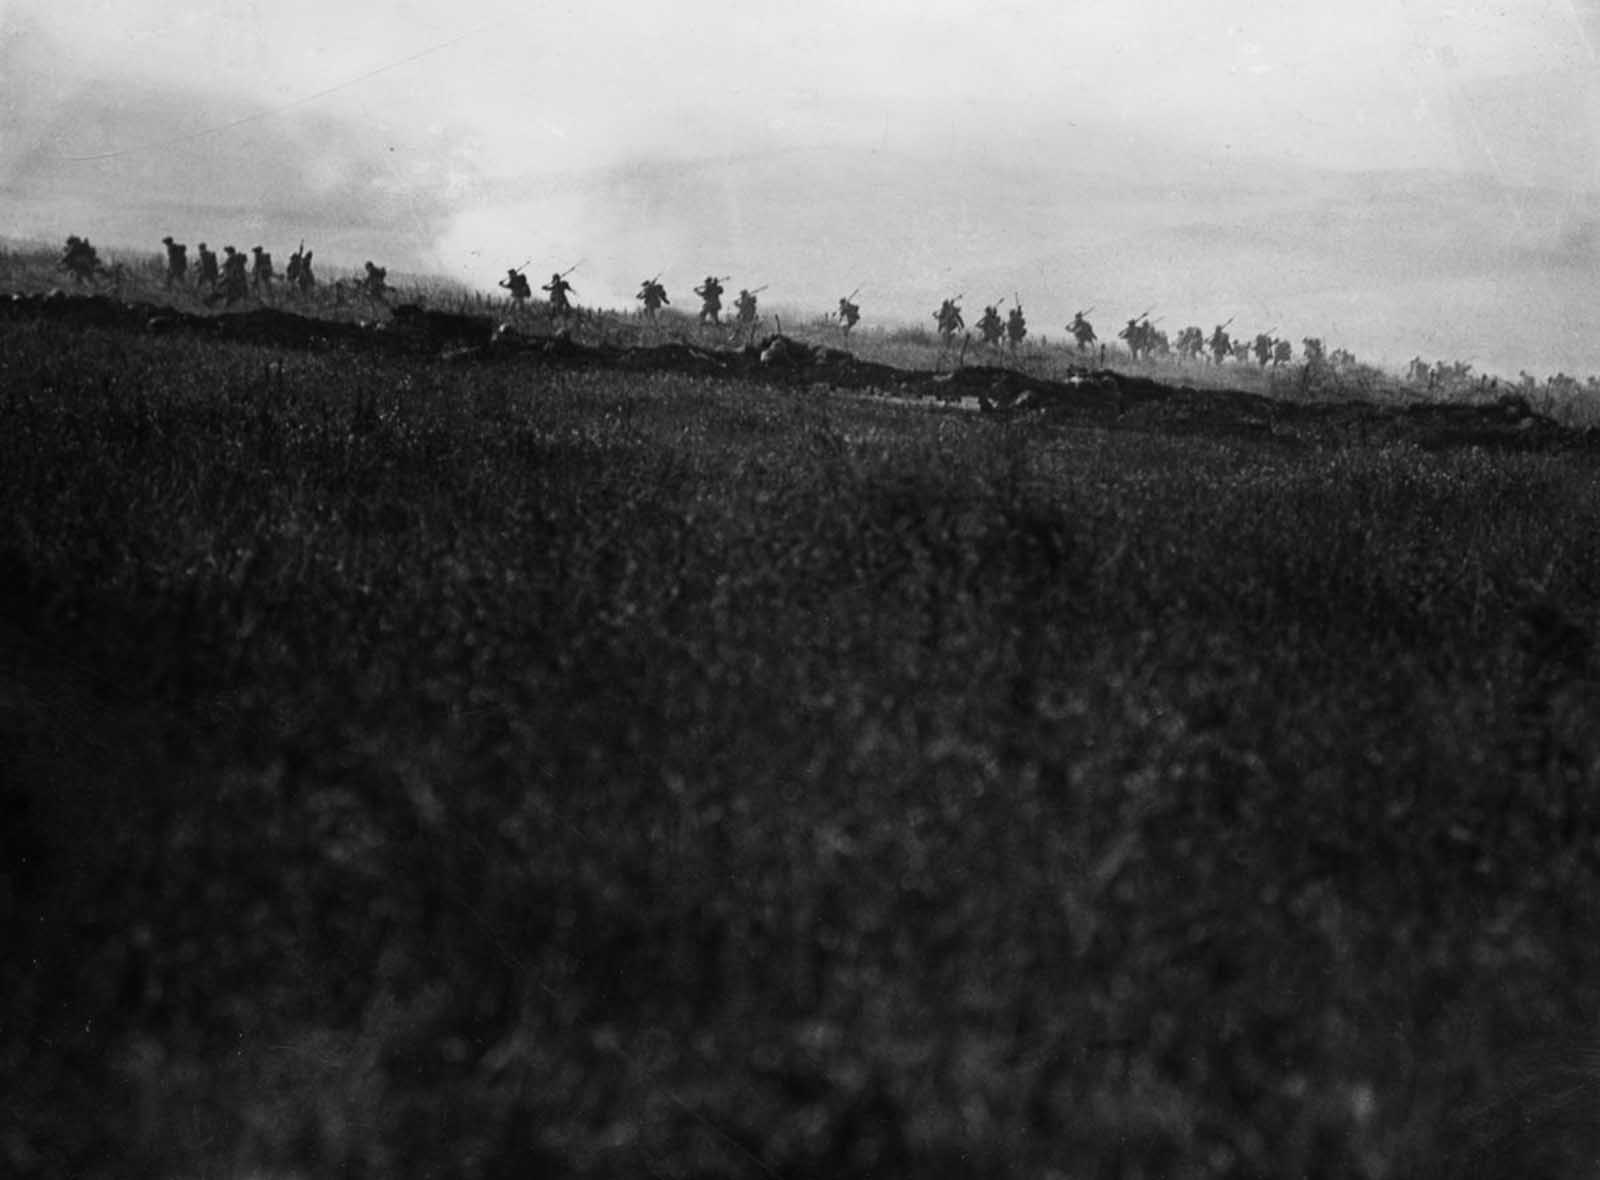 British 34th Division troops advance on the first day of the battle.